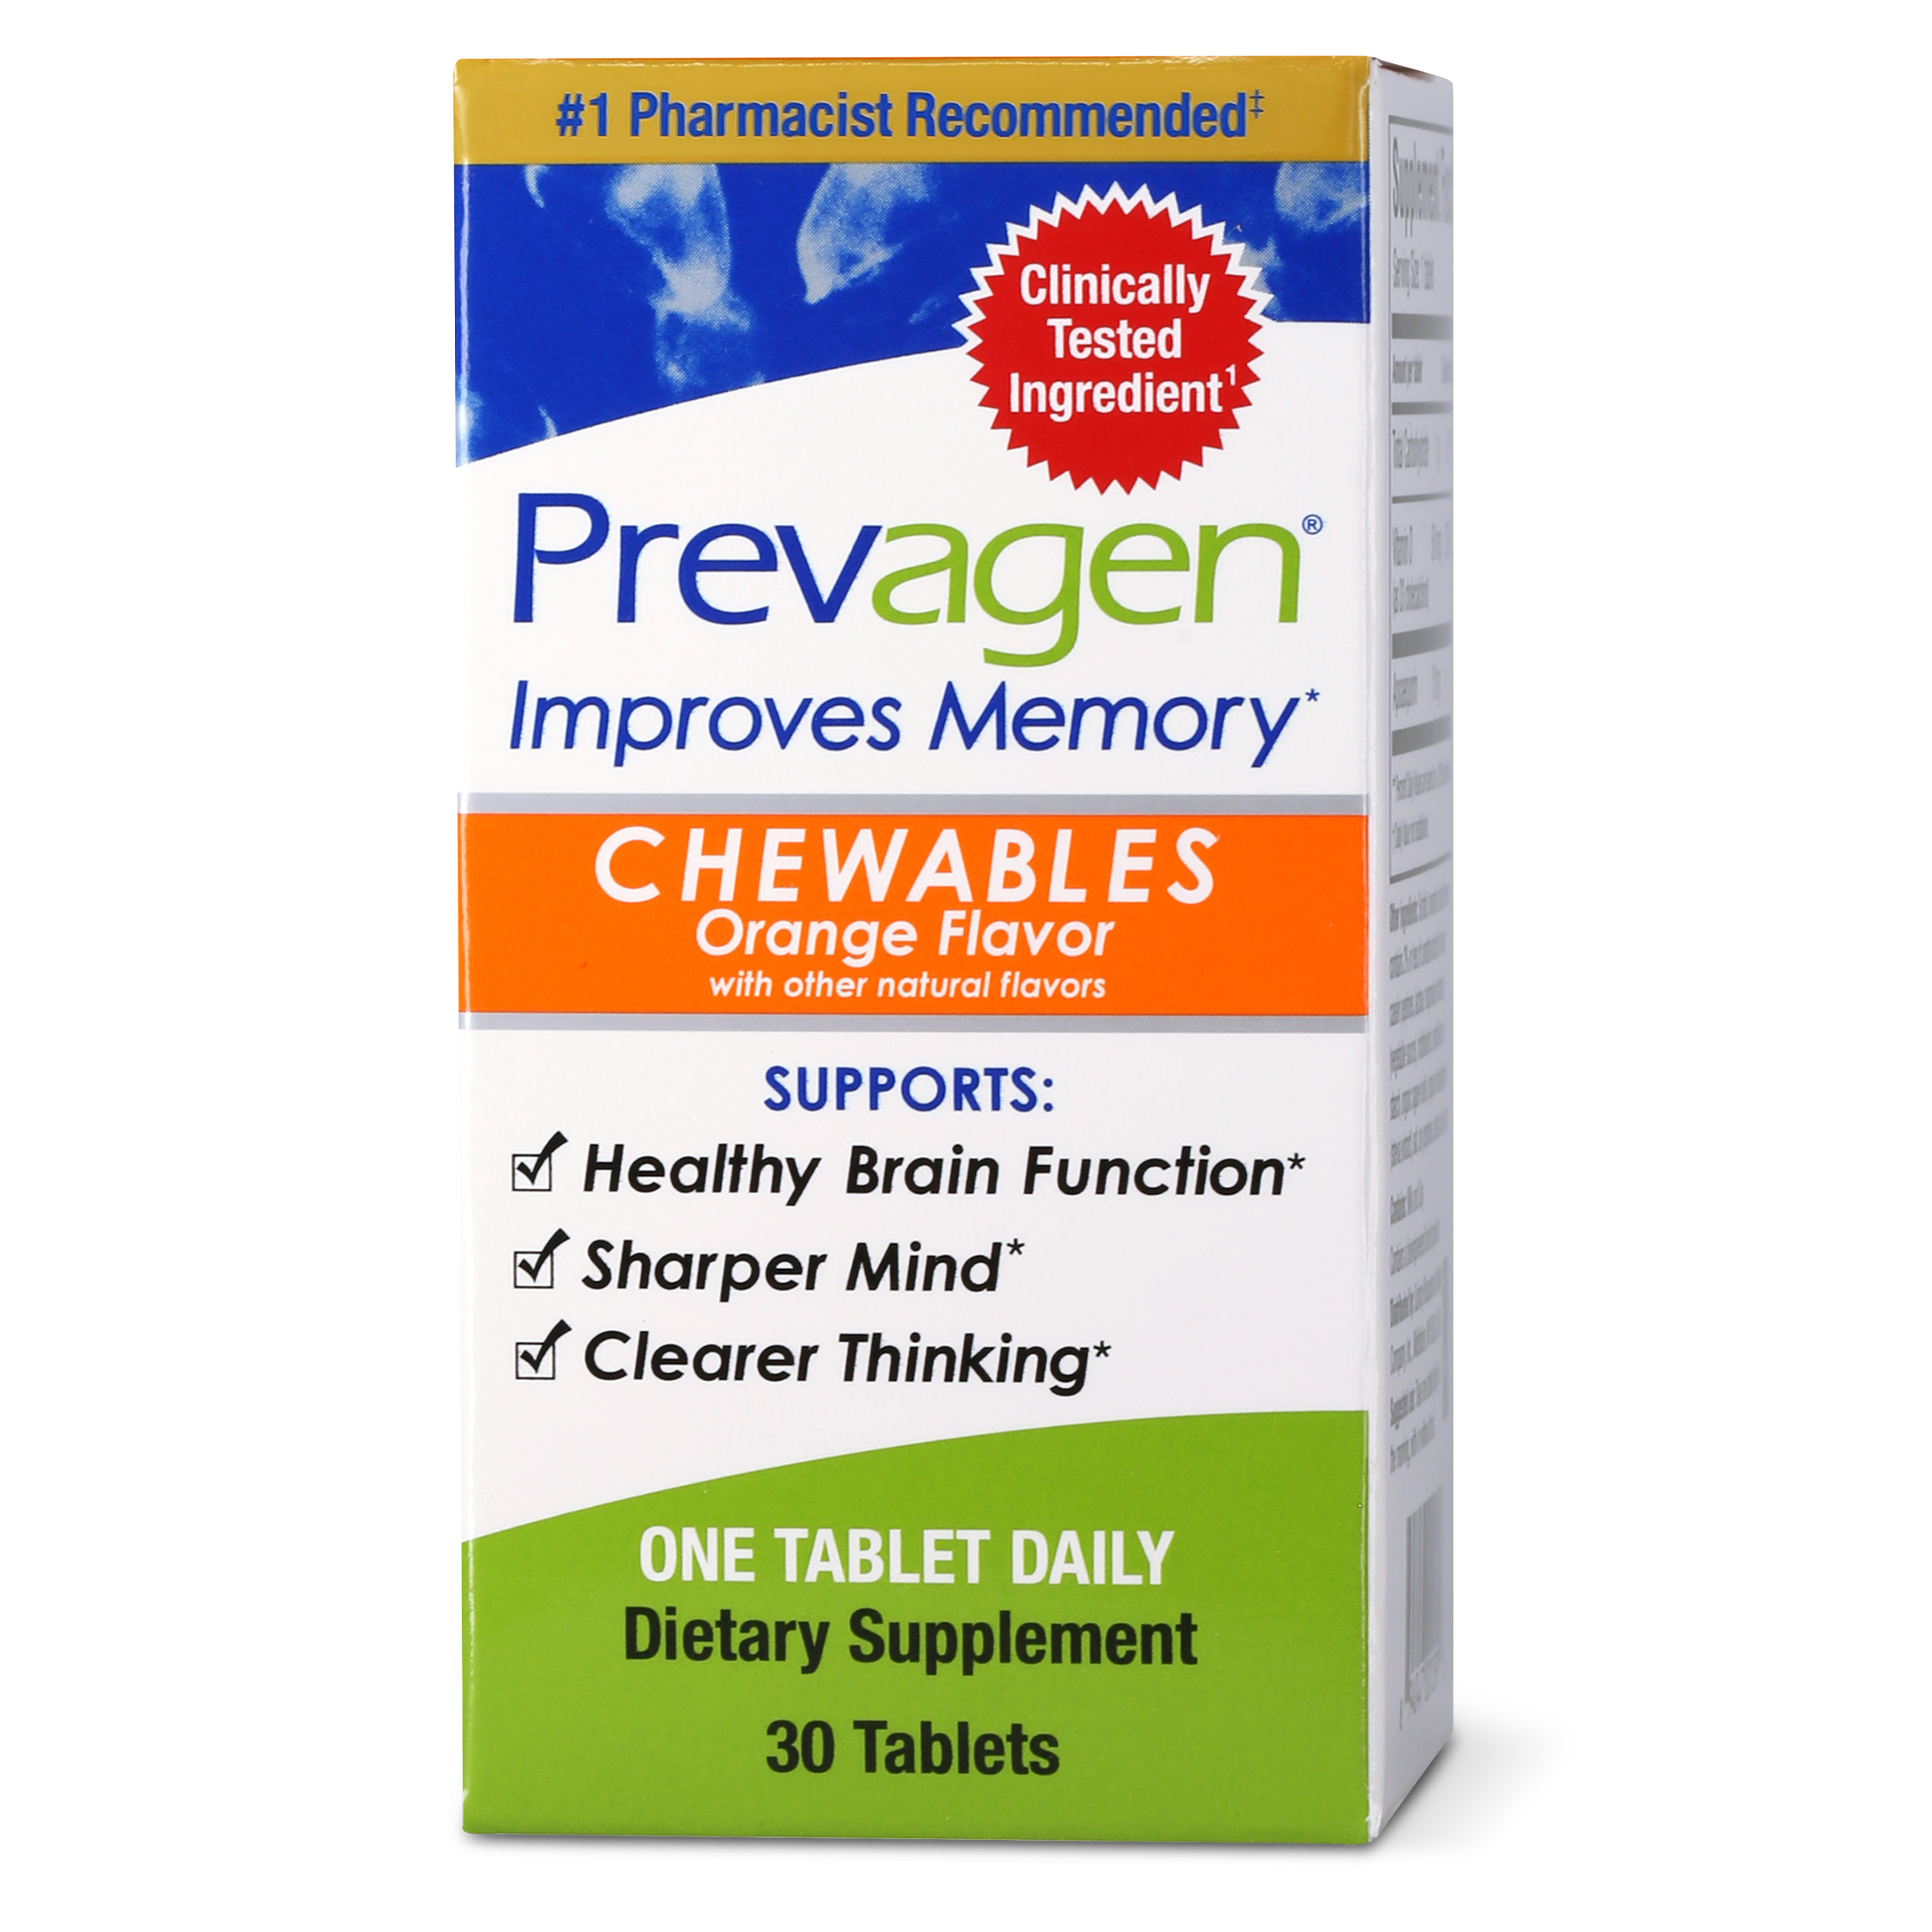 Prevagen Improves Memory - Regular Strength 10mg, 30 Chewable Tablets Orange Flavor with Apoaequorin & Vitamin D Brain Supplement, Supports Healthy Brain Function - image 1 of 9